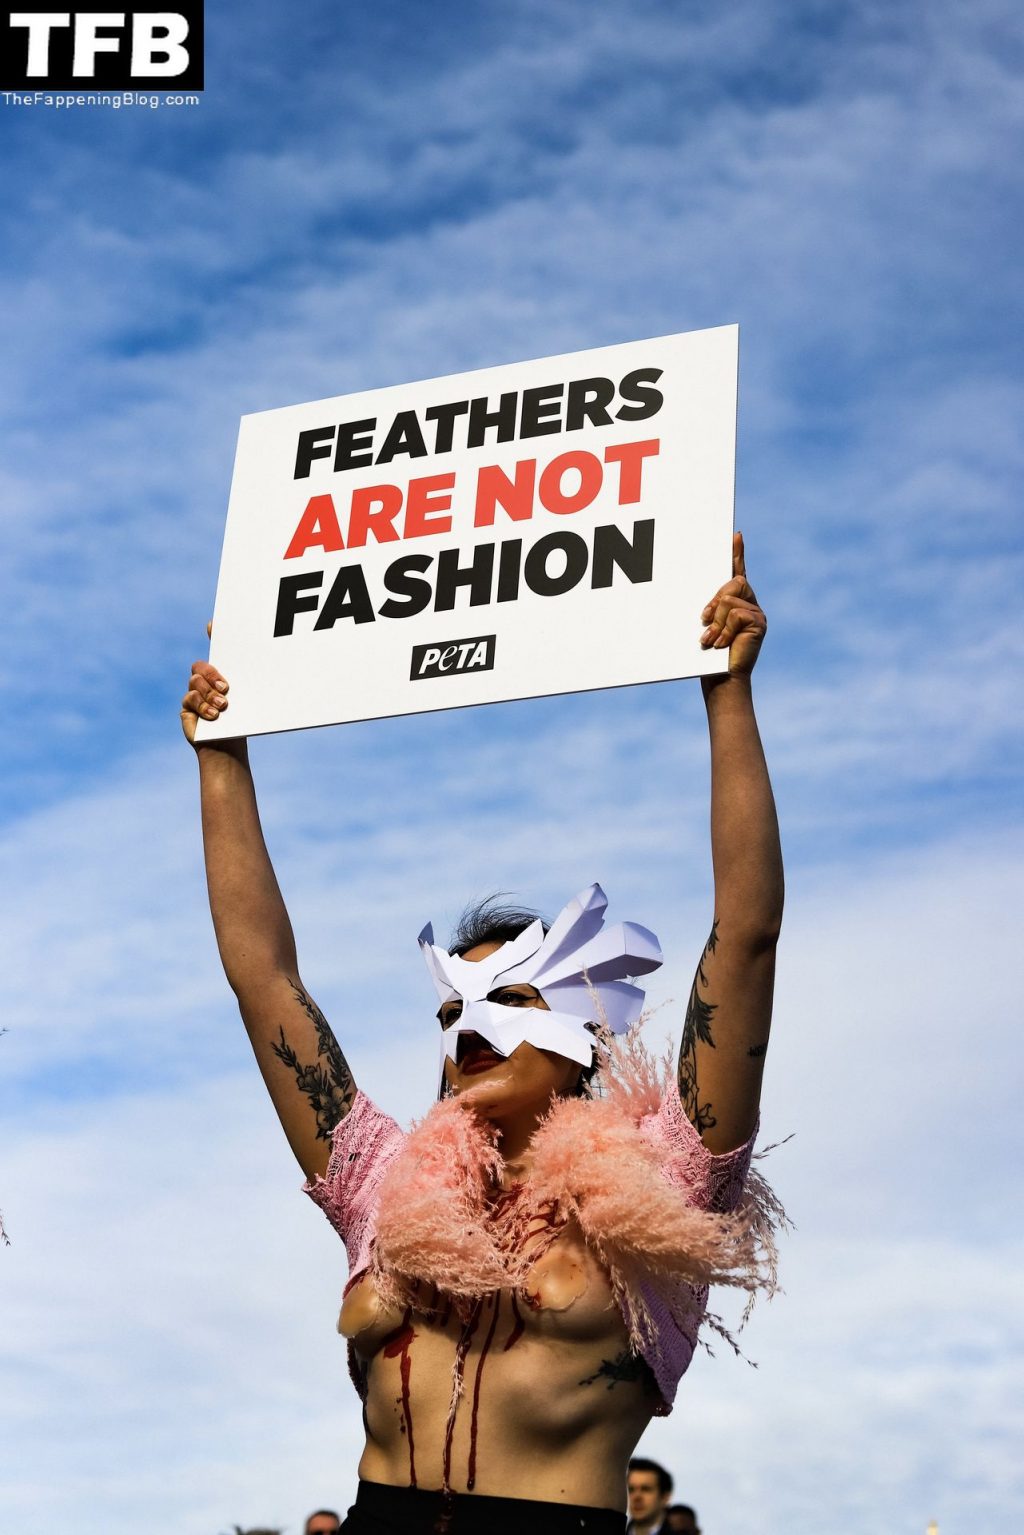 Topless Girls PETA The Fappening Blog 14 1024x1535 - PETA Topless Protest at Use of Feathers in the Fashion Industry (32 Photos)